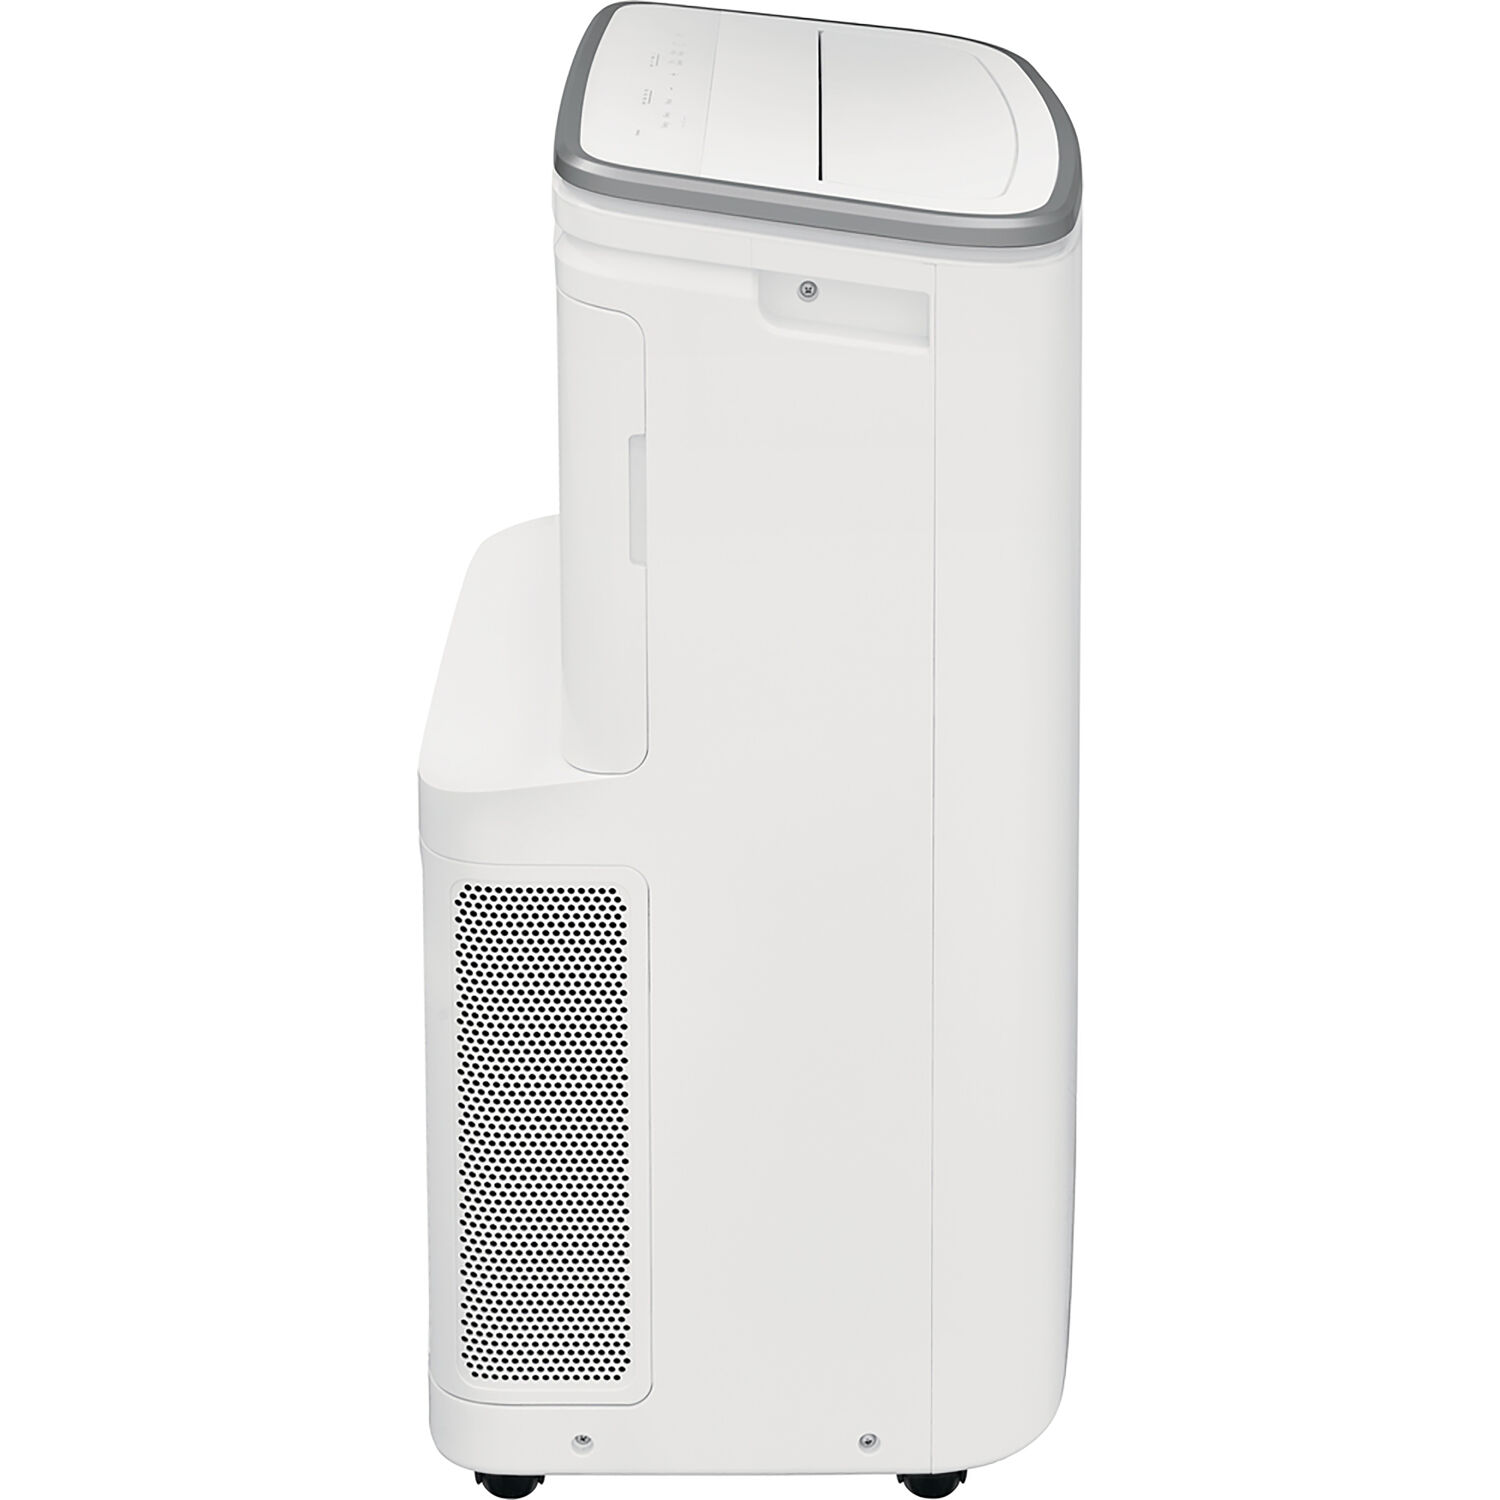 Frigidaire Cool Connect Smart Portable Air Conditioner with Wi-Fi Control for a Room up to 600-Sq. Ft. - image 9 of 14